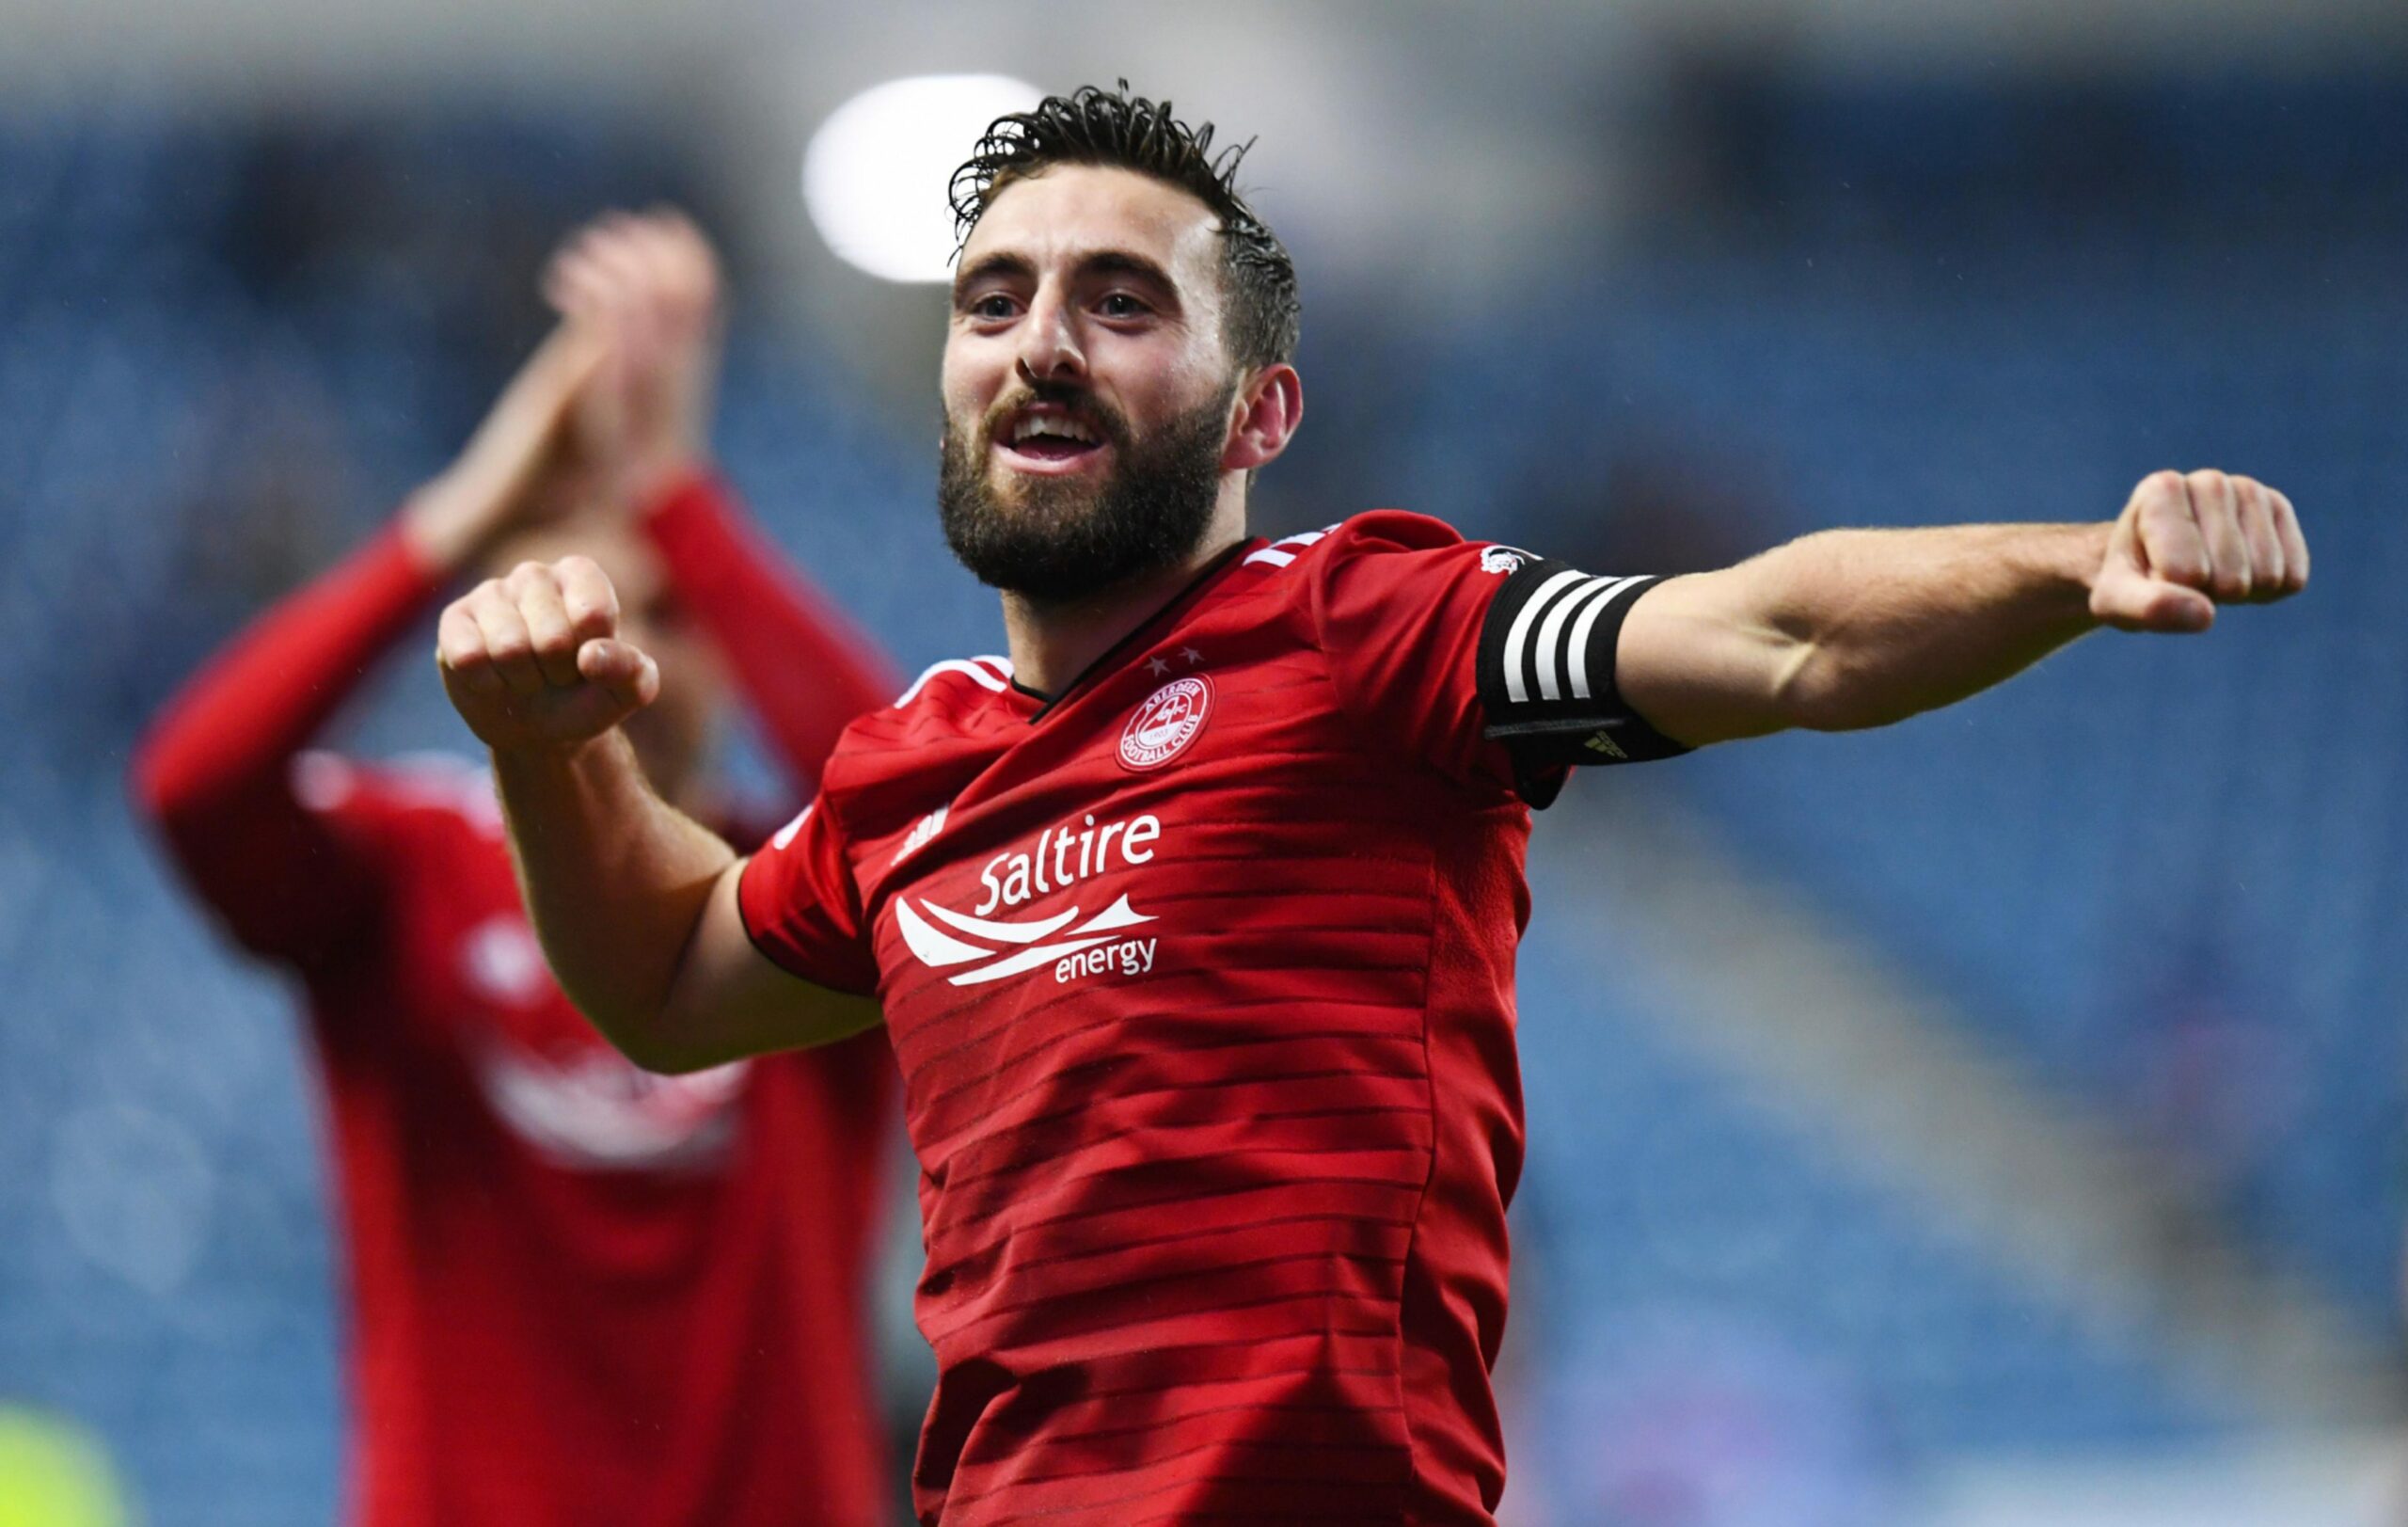 Former Aberdeen captain Graeme Shinnie gave the Dons a glowing report.